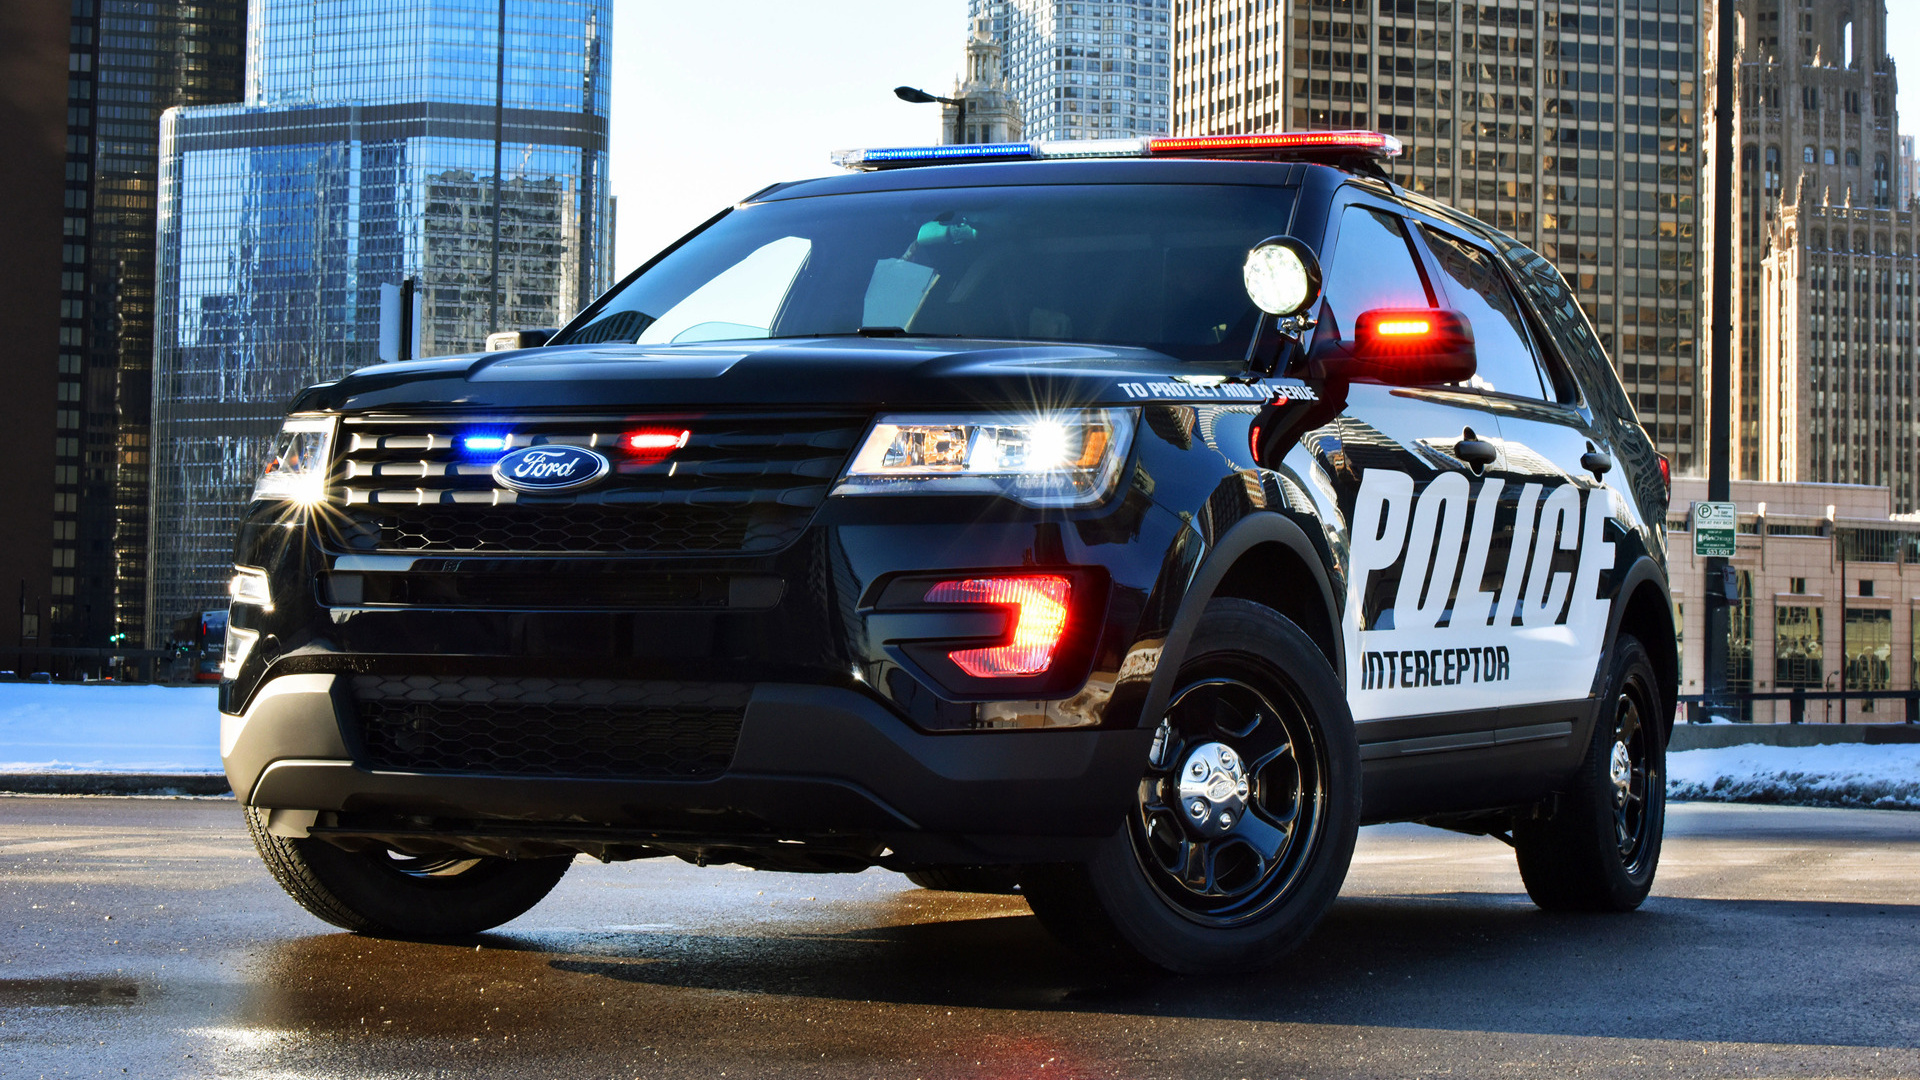 2016 Ford Police Interceptor Utility   Wallpapers and HD Images